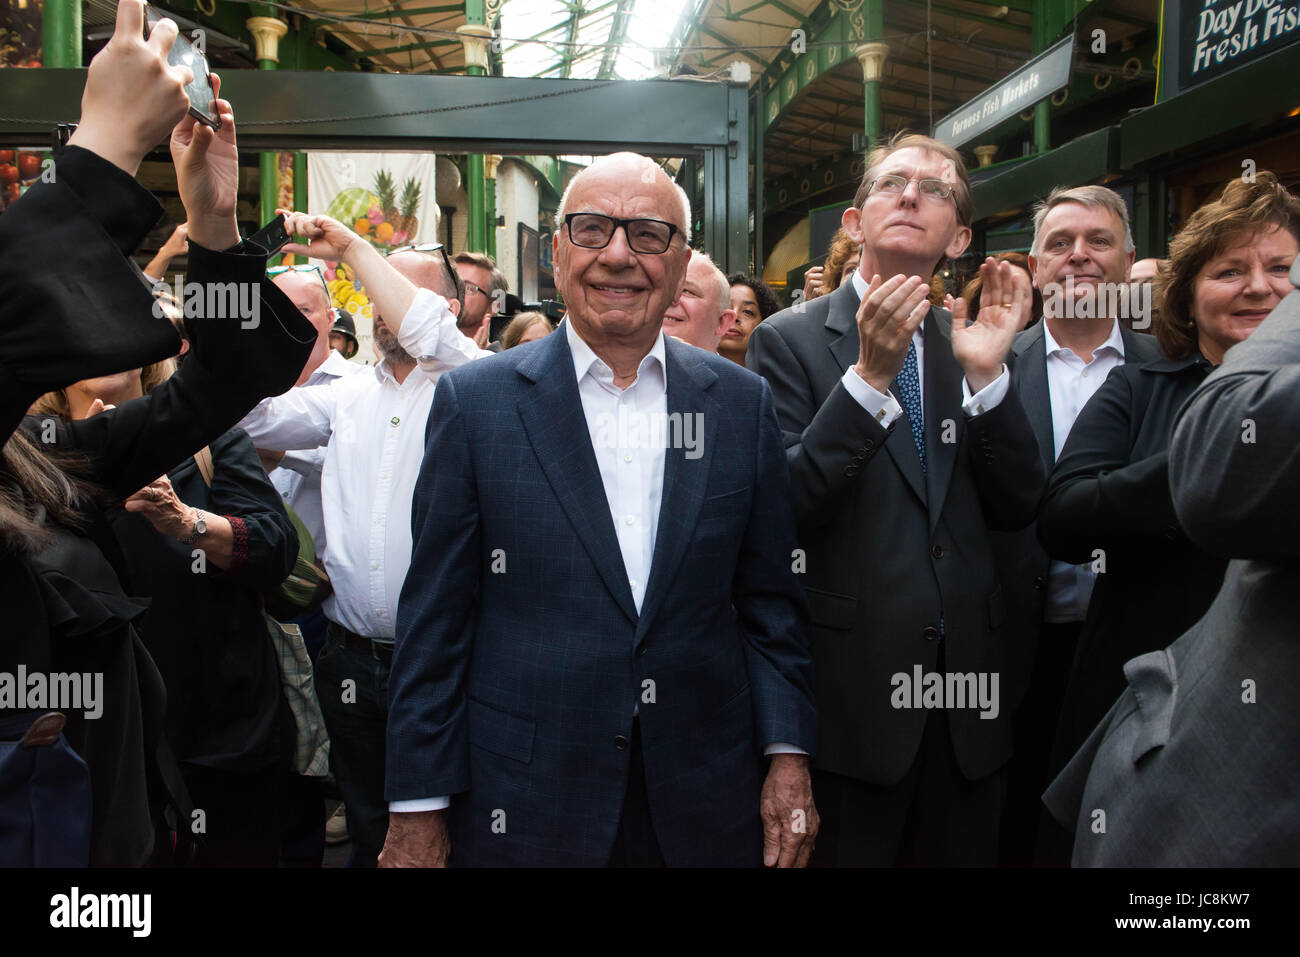 London, UK. 14th June, 2017. Rupert Murdoch at Borough Market as it re-opens to the public following the terrorist attack. Borough Market open to the public following 3rd June terror attack. Eight people were killed and at least 48 injured in terror attacks on London Bridge and Borough Market. Credit: Michael Tubi/Alamy Live News Stock Photo